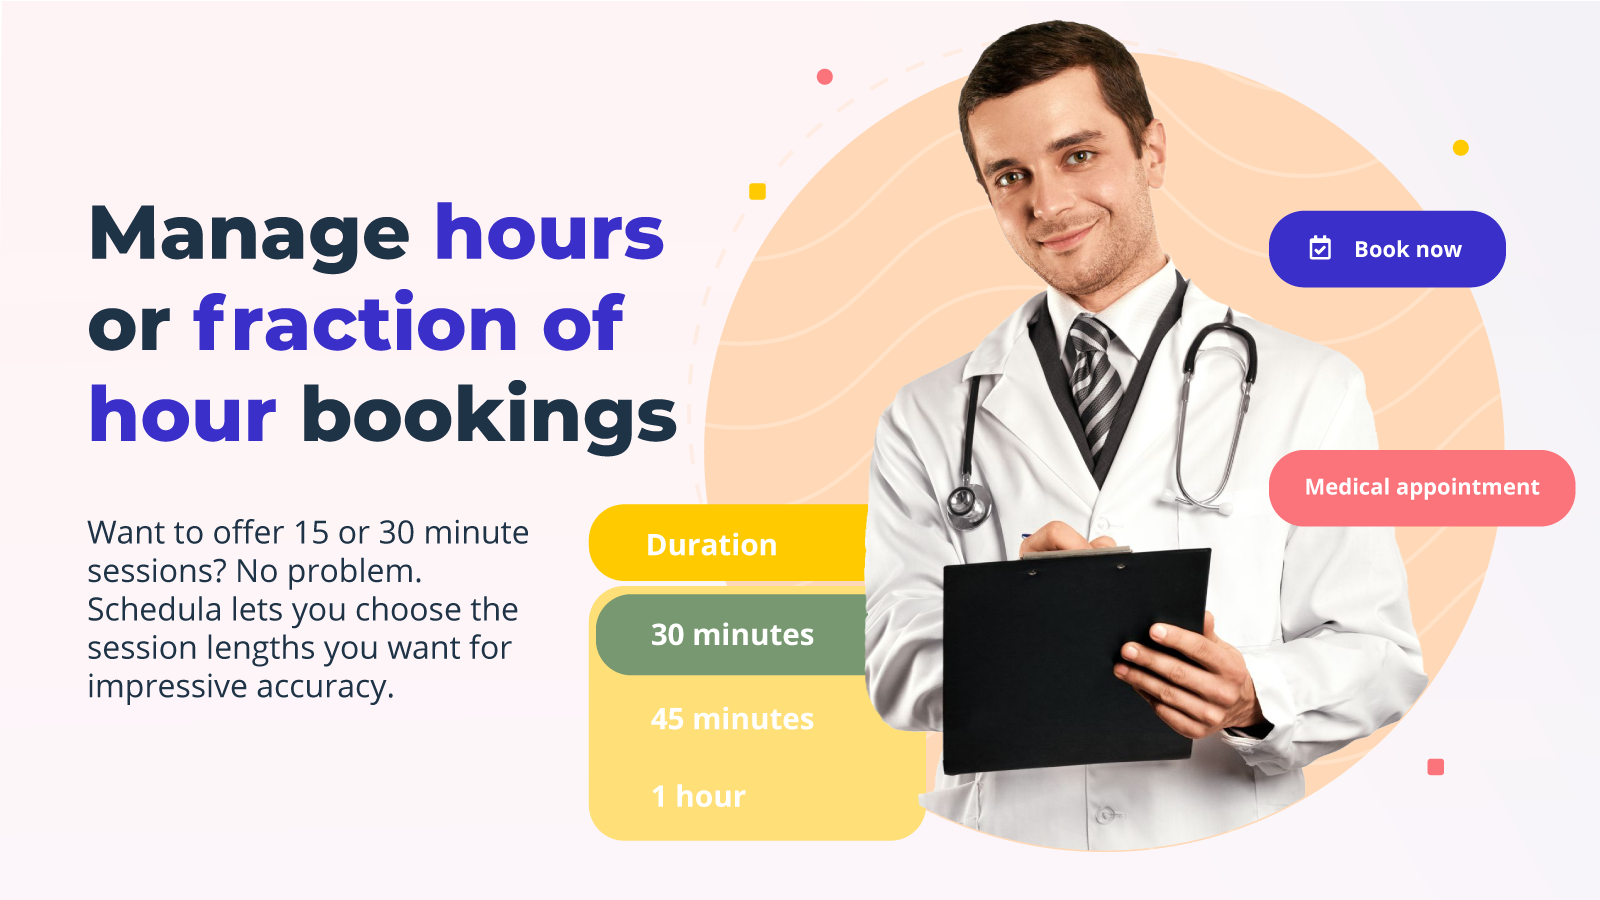 Manage hours or fraction of hour bookings